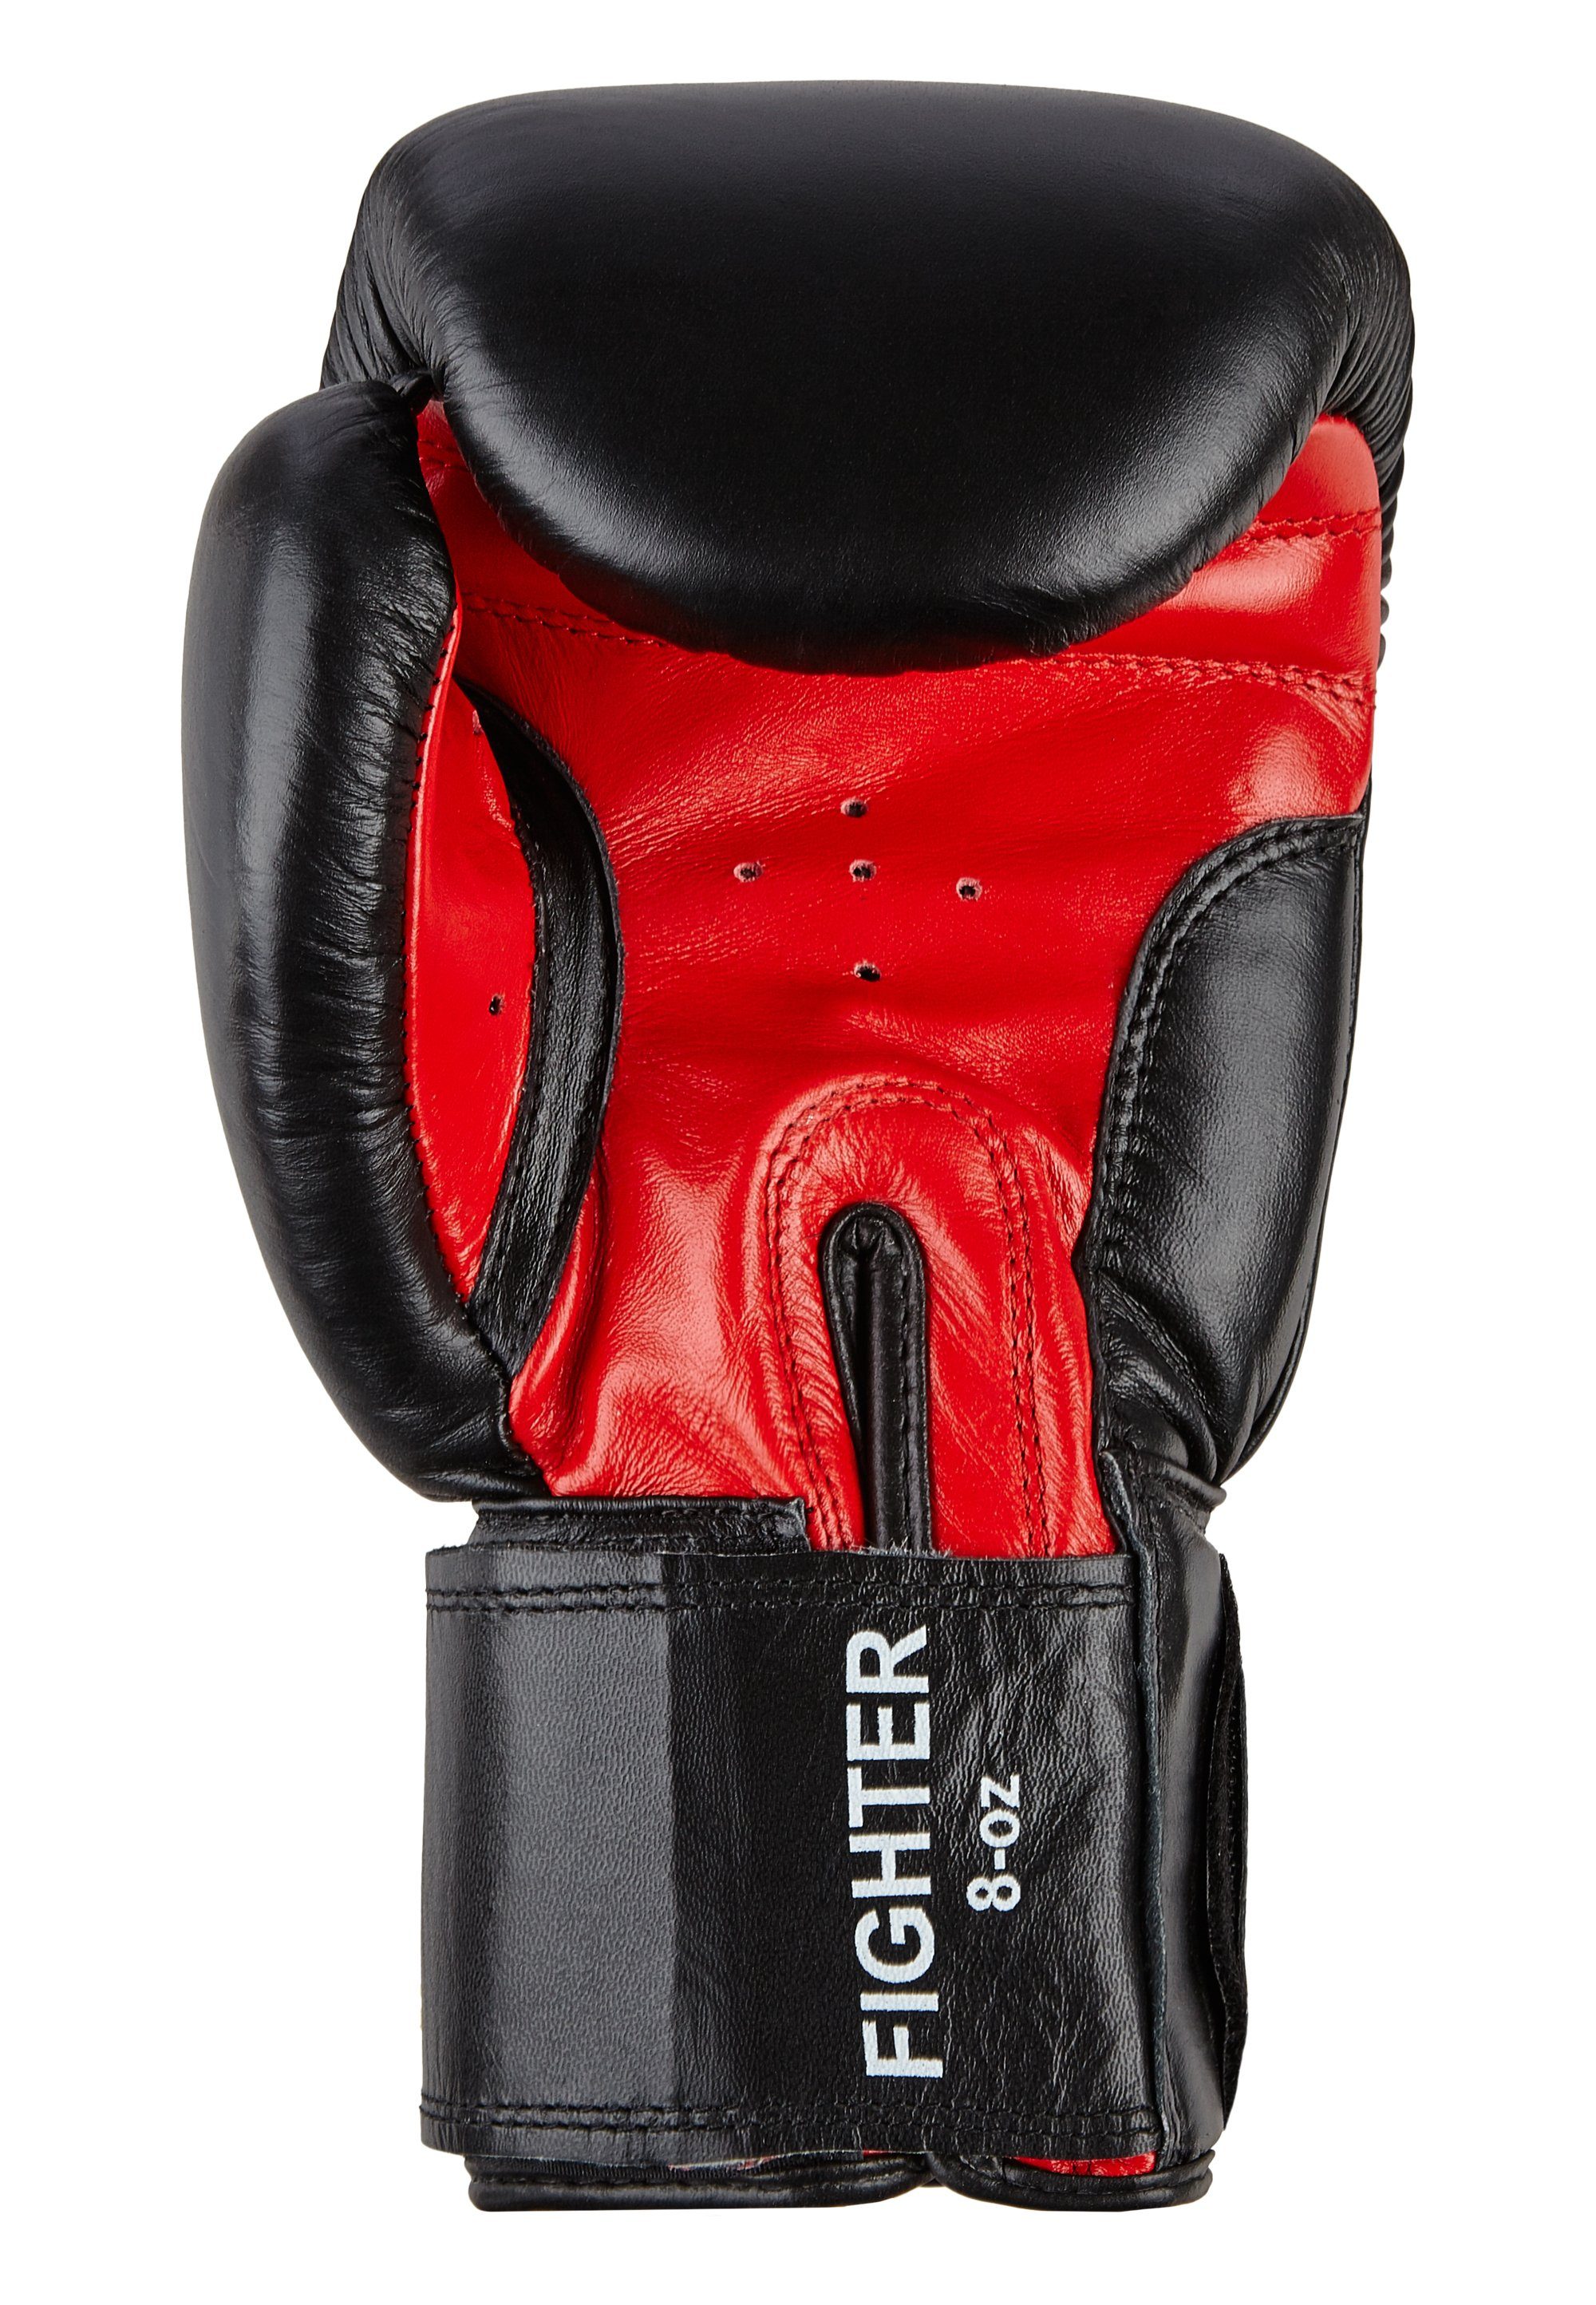 Benlee Rocky Marciano Boxhandschuhe FIGHTER Black/Red